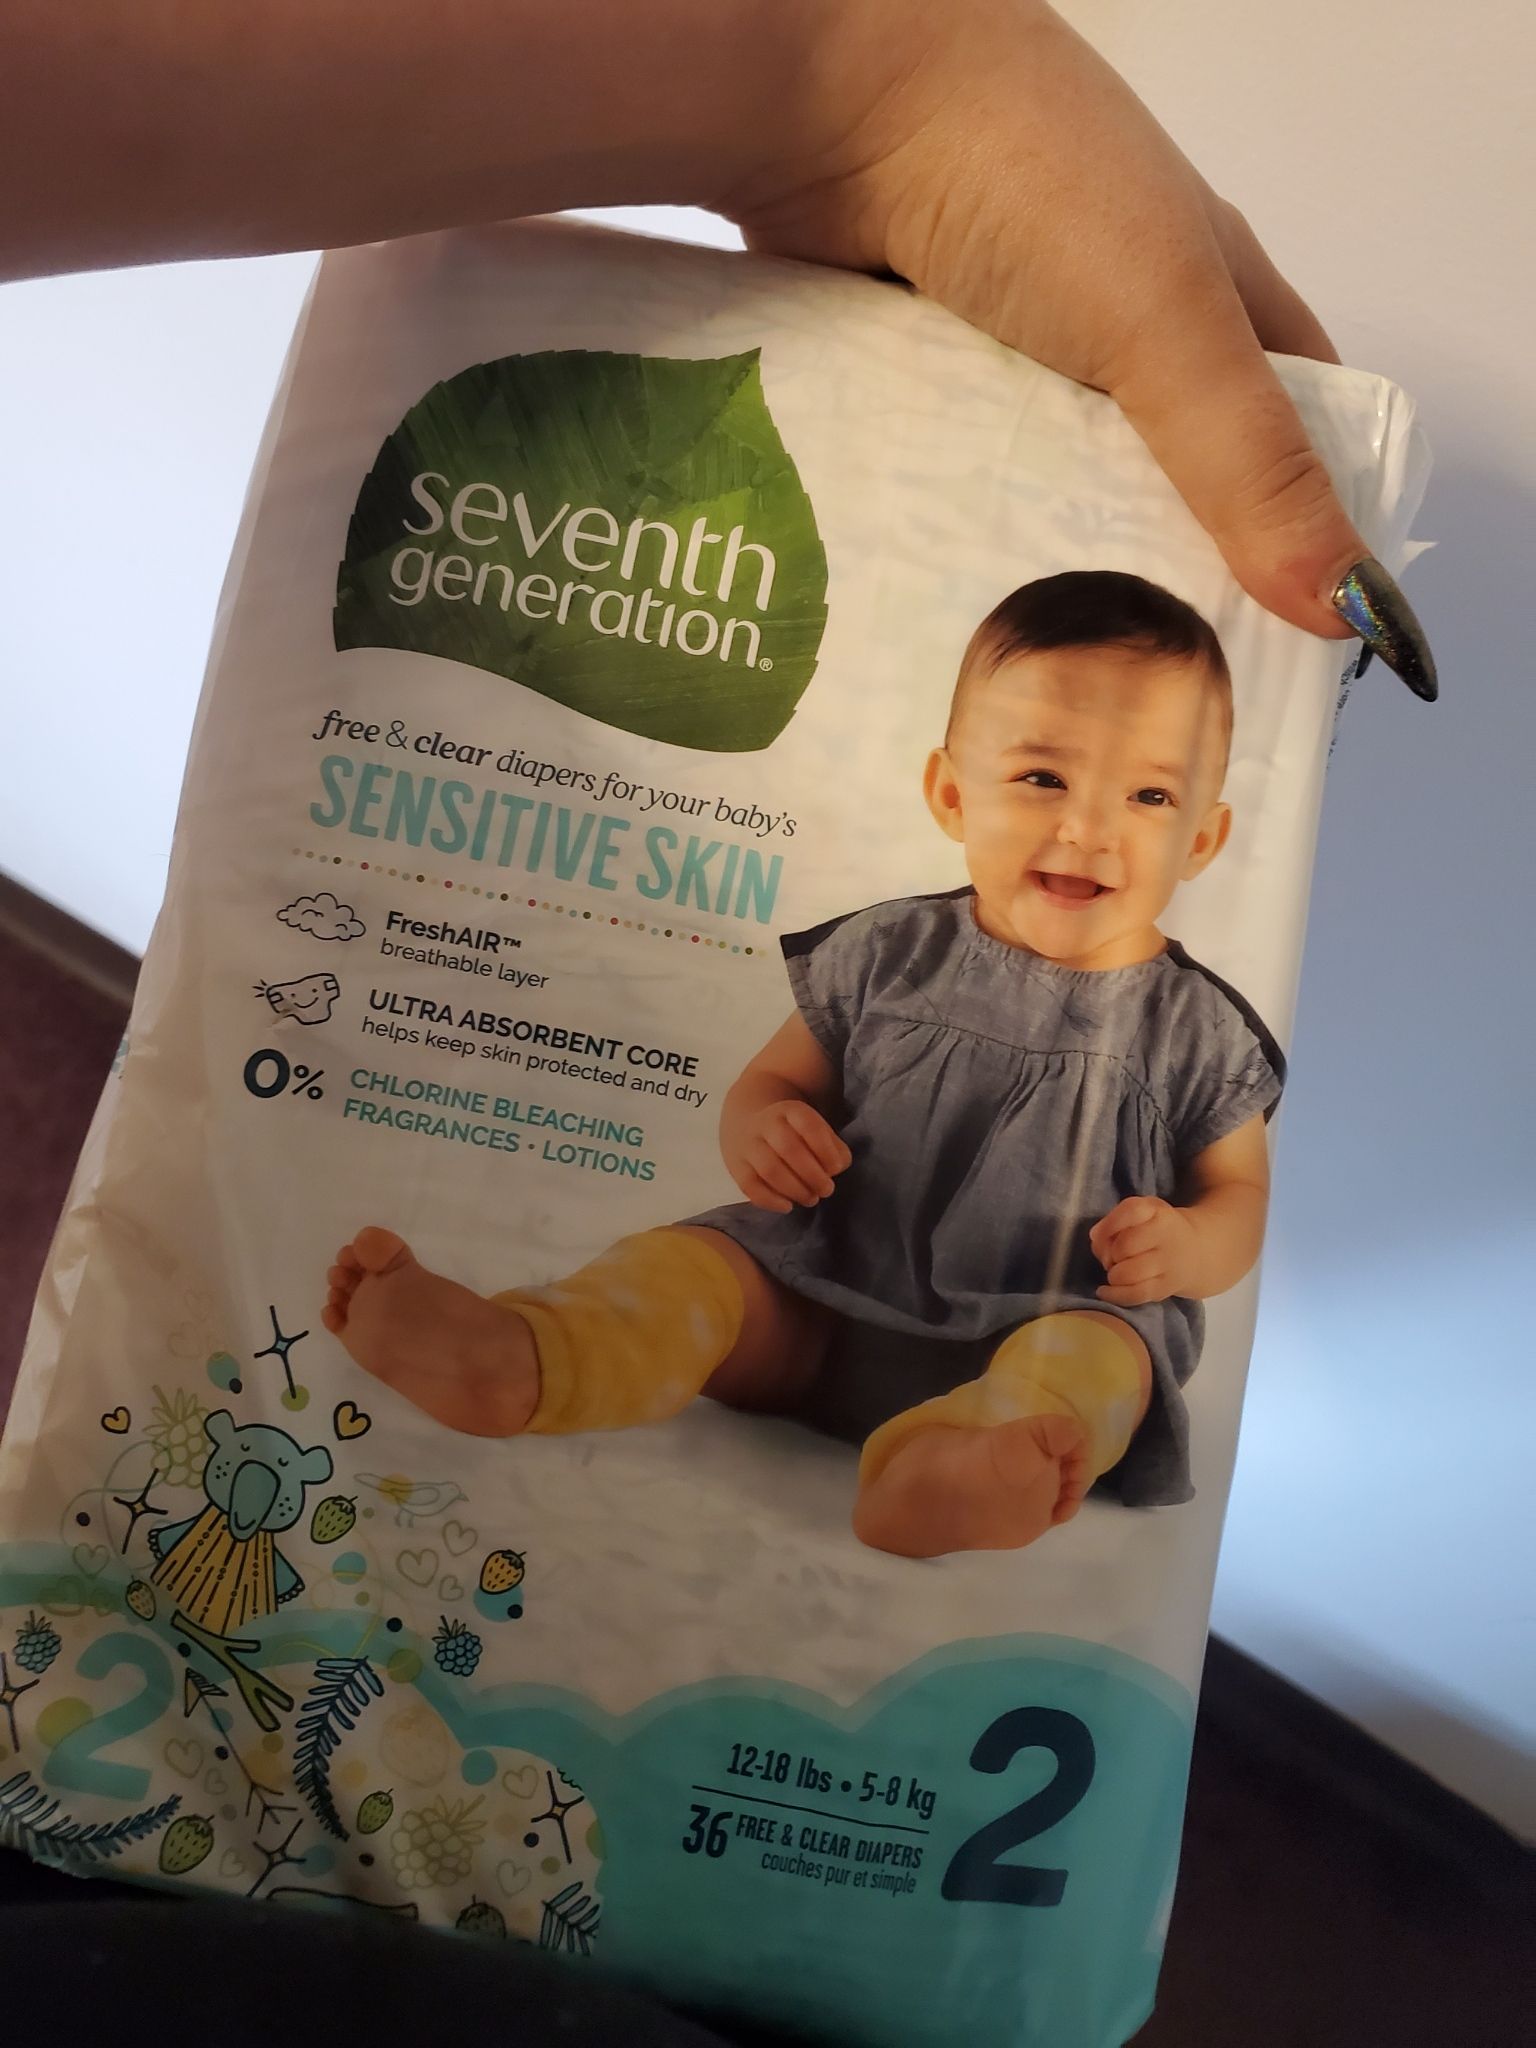 Seventh generation diapers size 1 40 count size 2 36 count